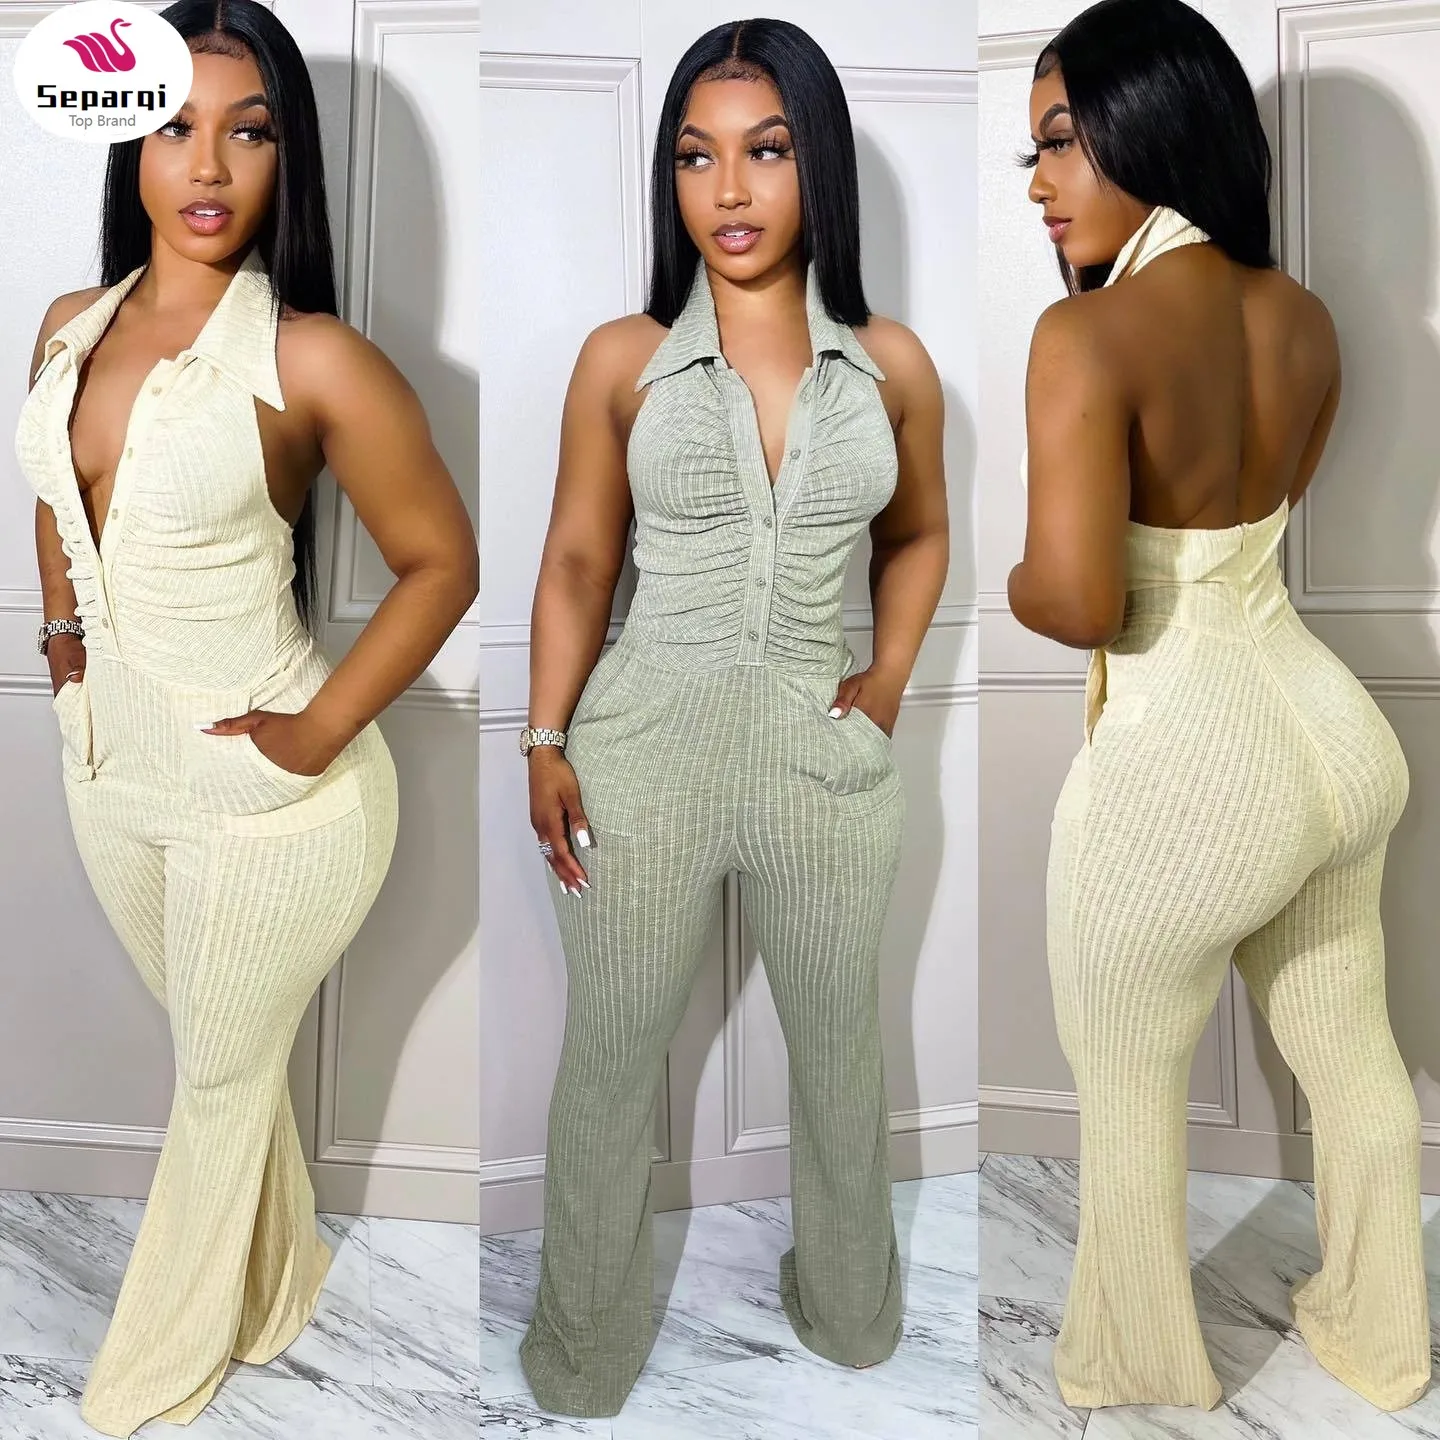 

Turn Down Collar Halter Sexy Jumpsuit Pocket Knitted Ribbed Backless Skinny Bodycon Rompers Clubwear Outfits Overalls